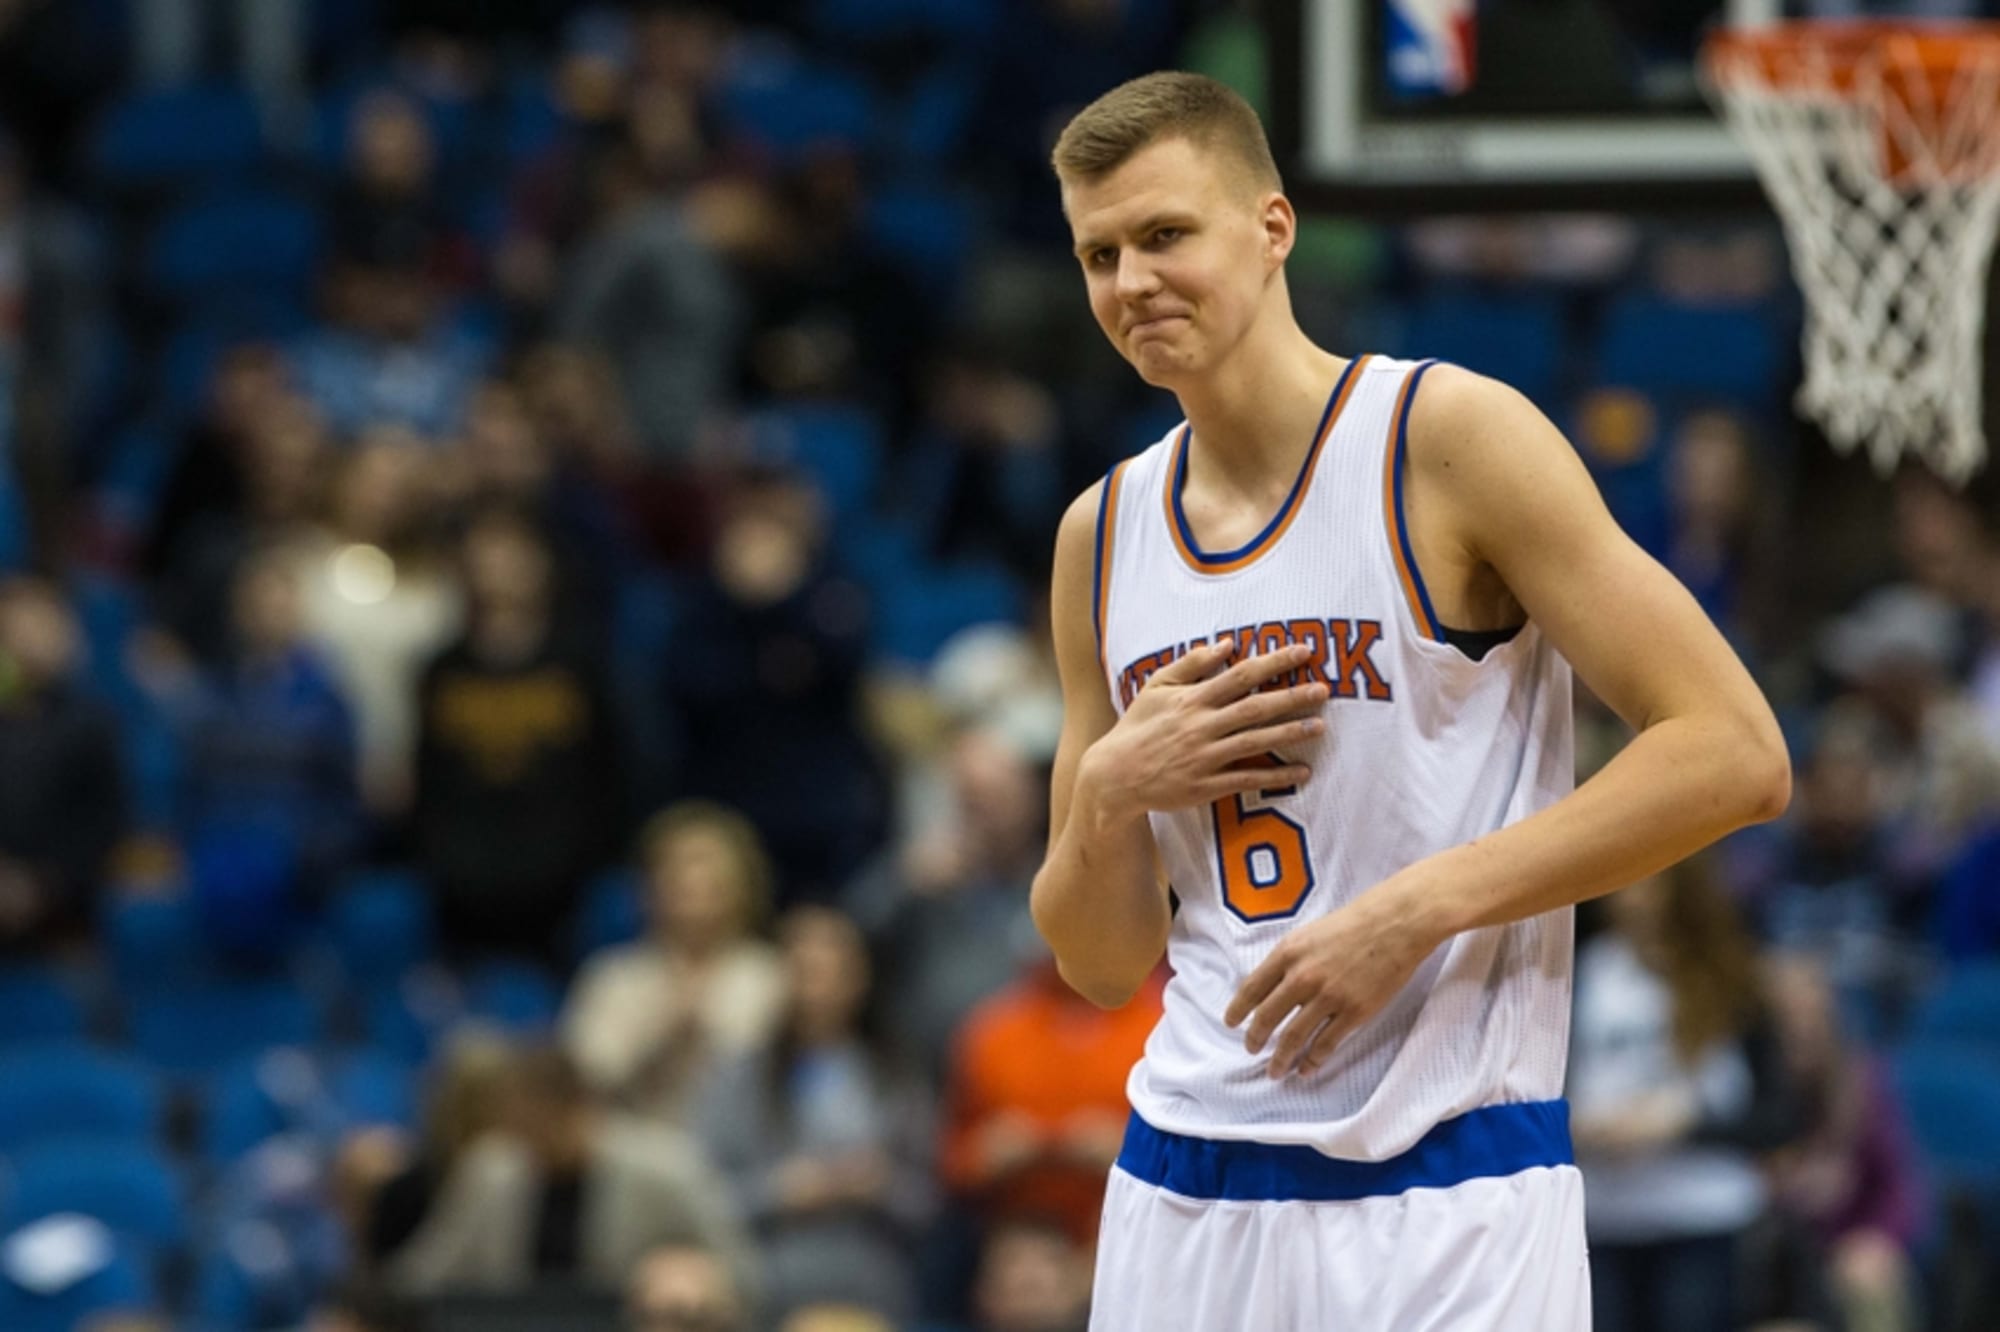 Knicks rookie Kristaps Porzingis is toast of NYC as his jersey is